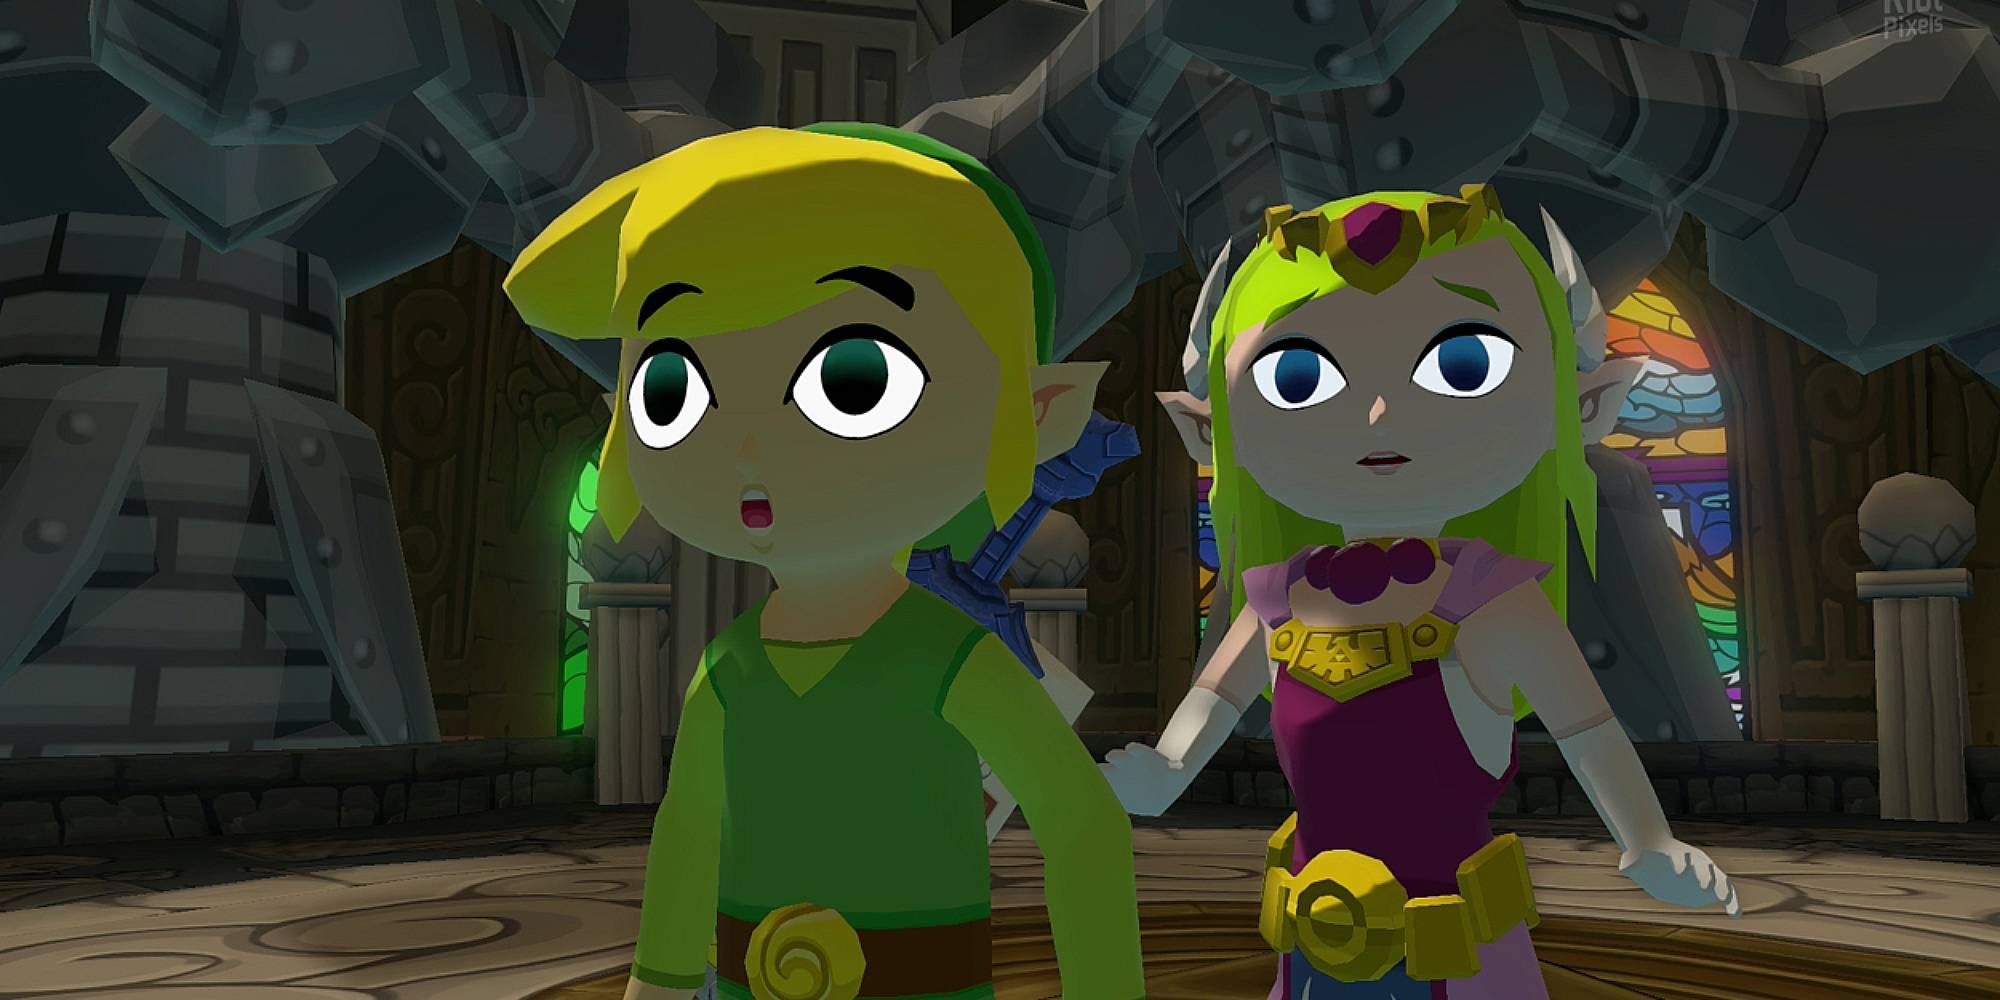 Toon Link and Zelda look up shocked at something off-camera in a dungeon in Wind Waker